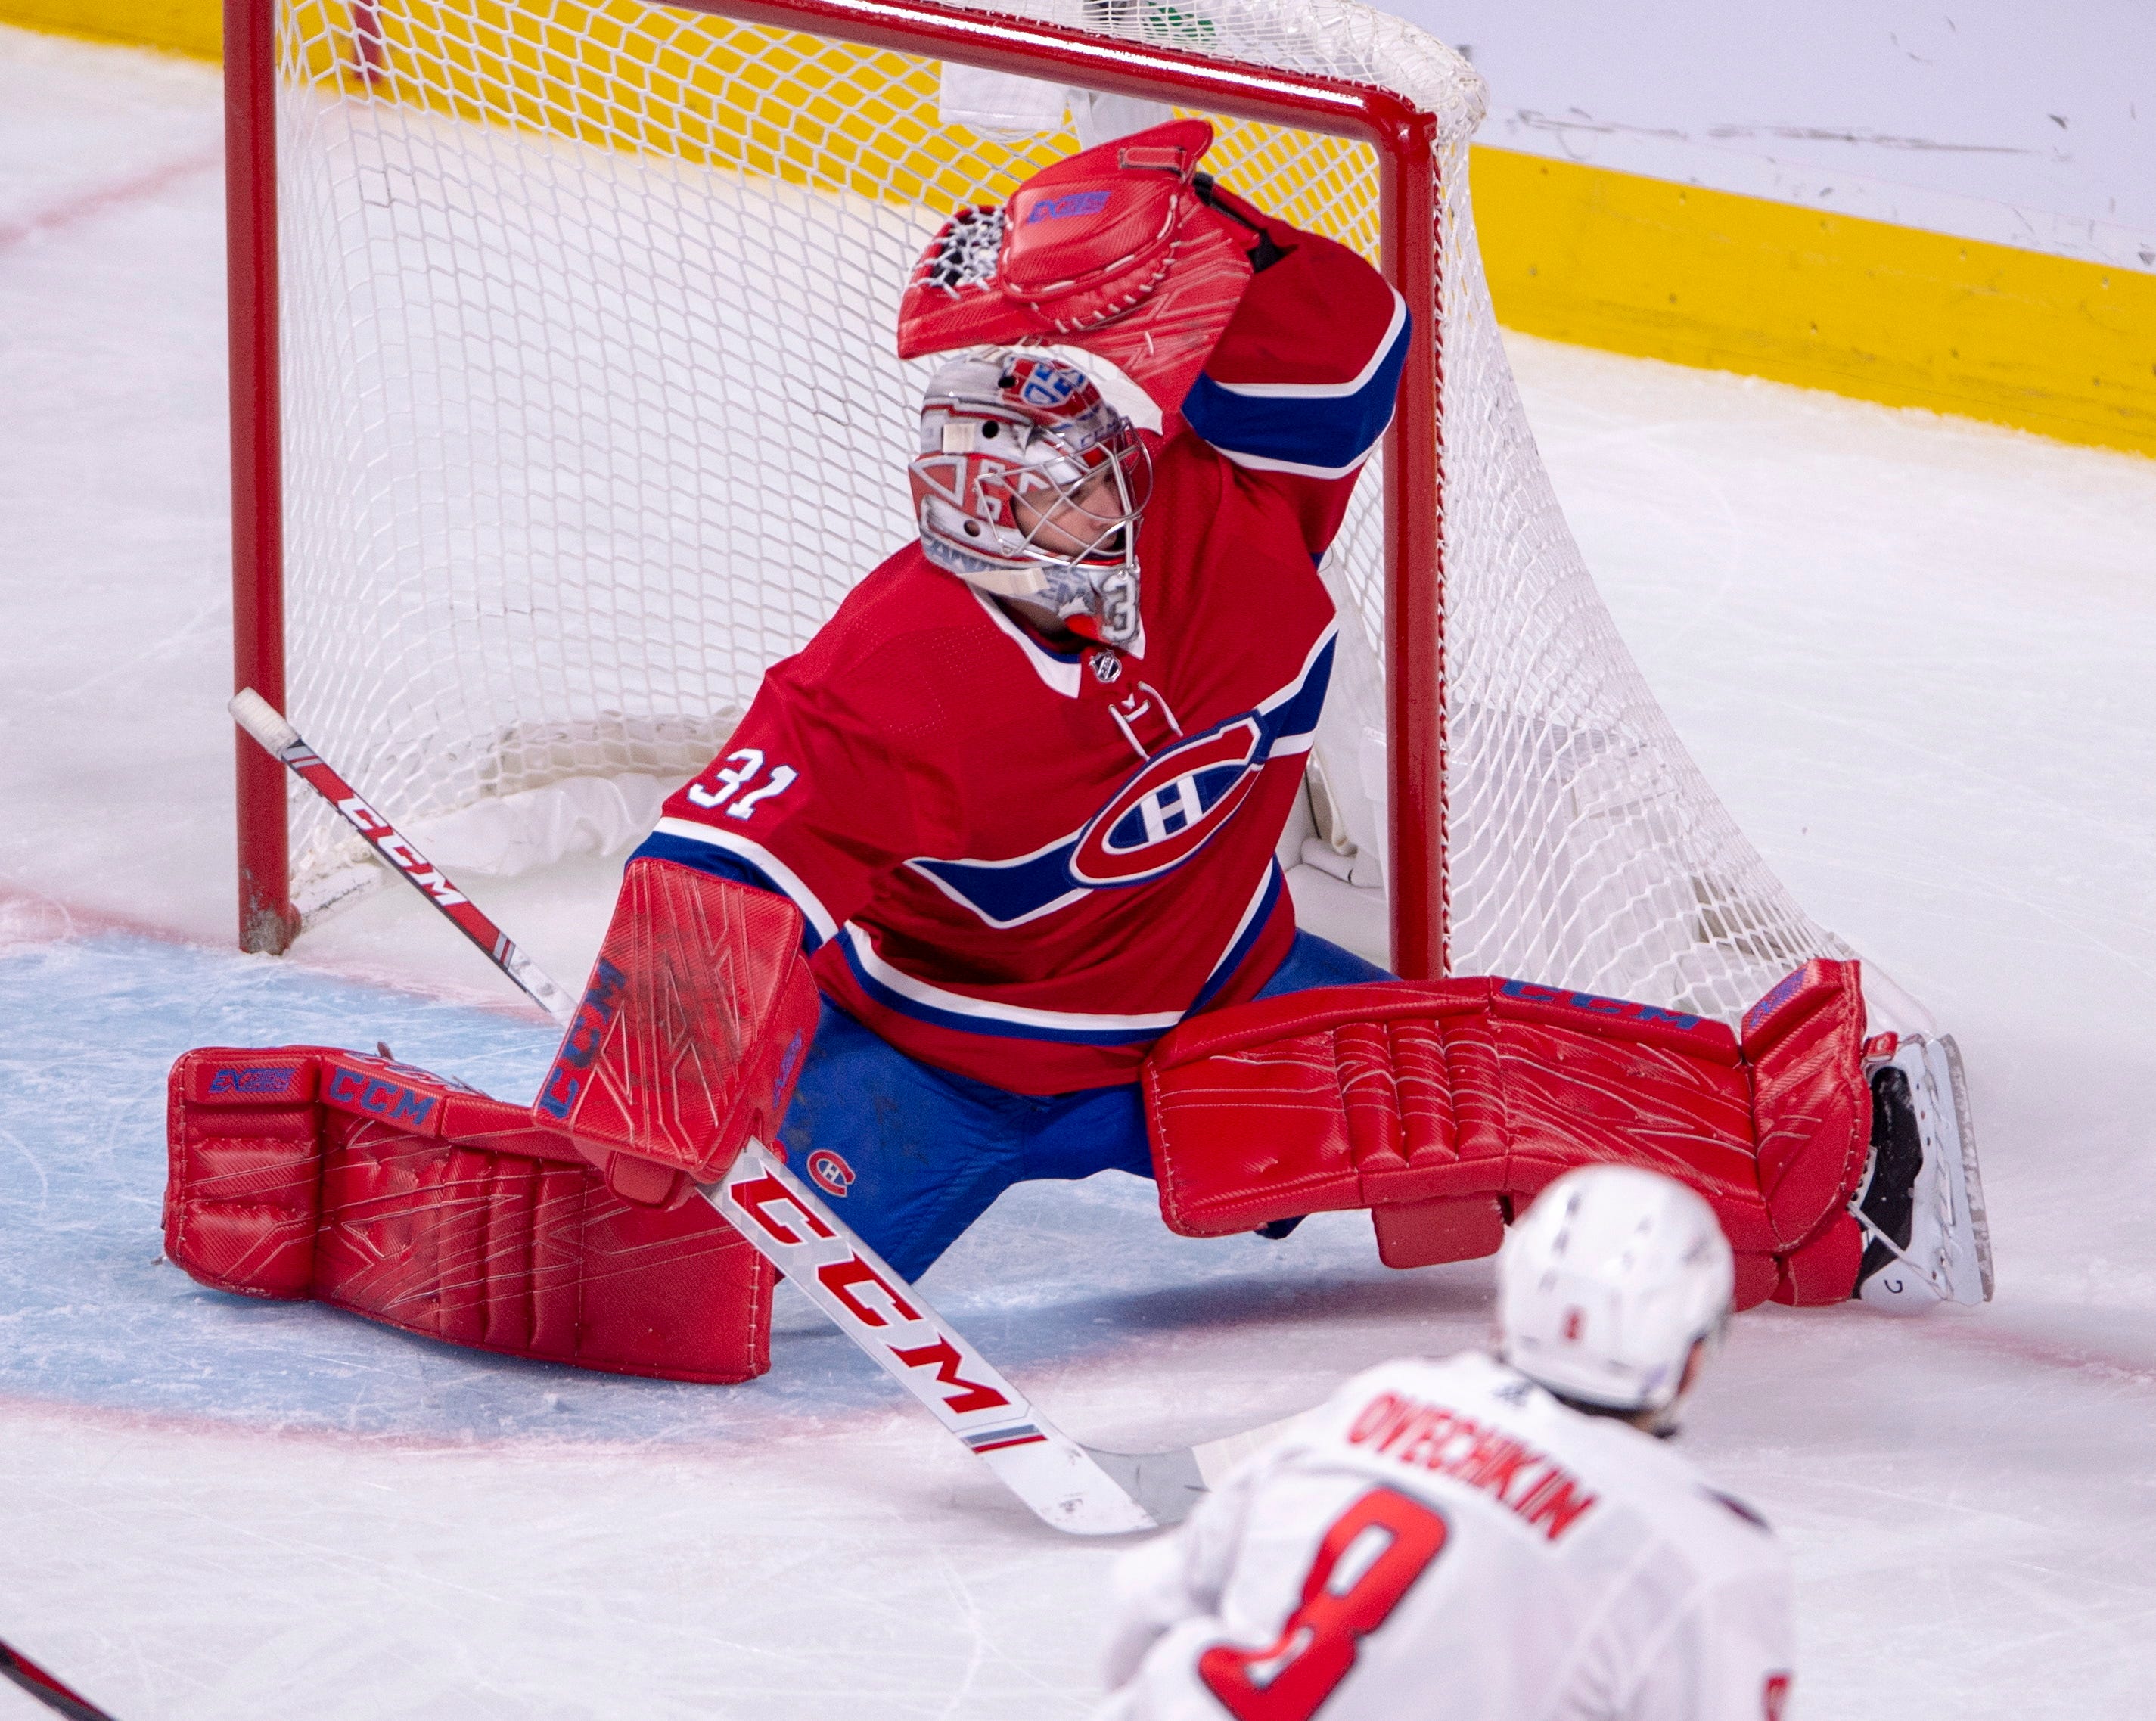 Montreal goalie Carey Price, pictured.